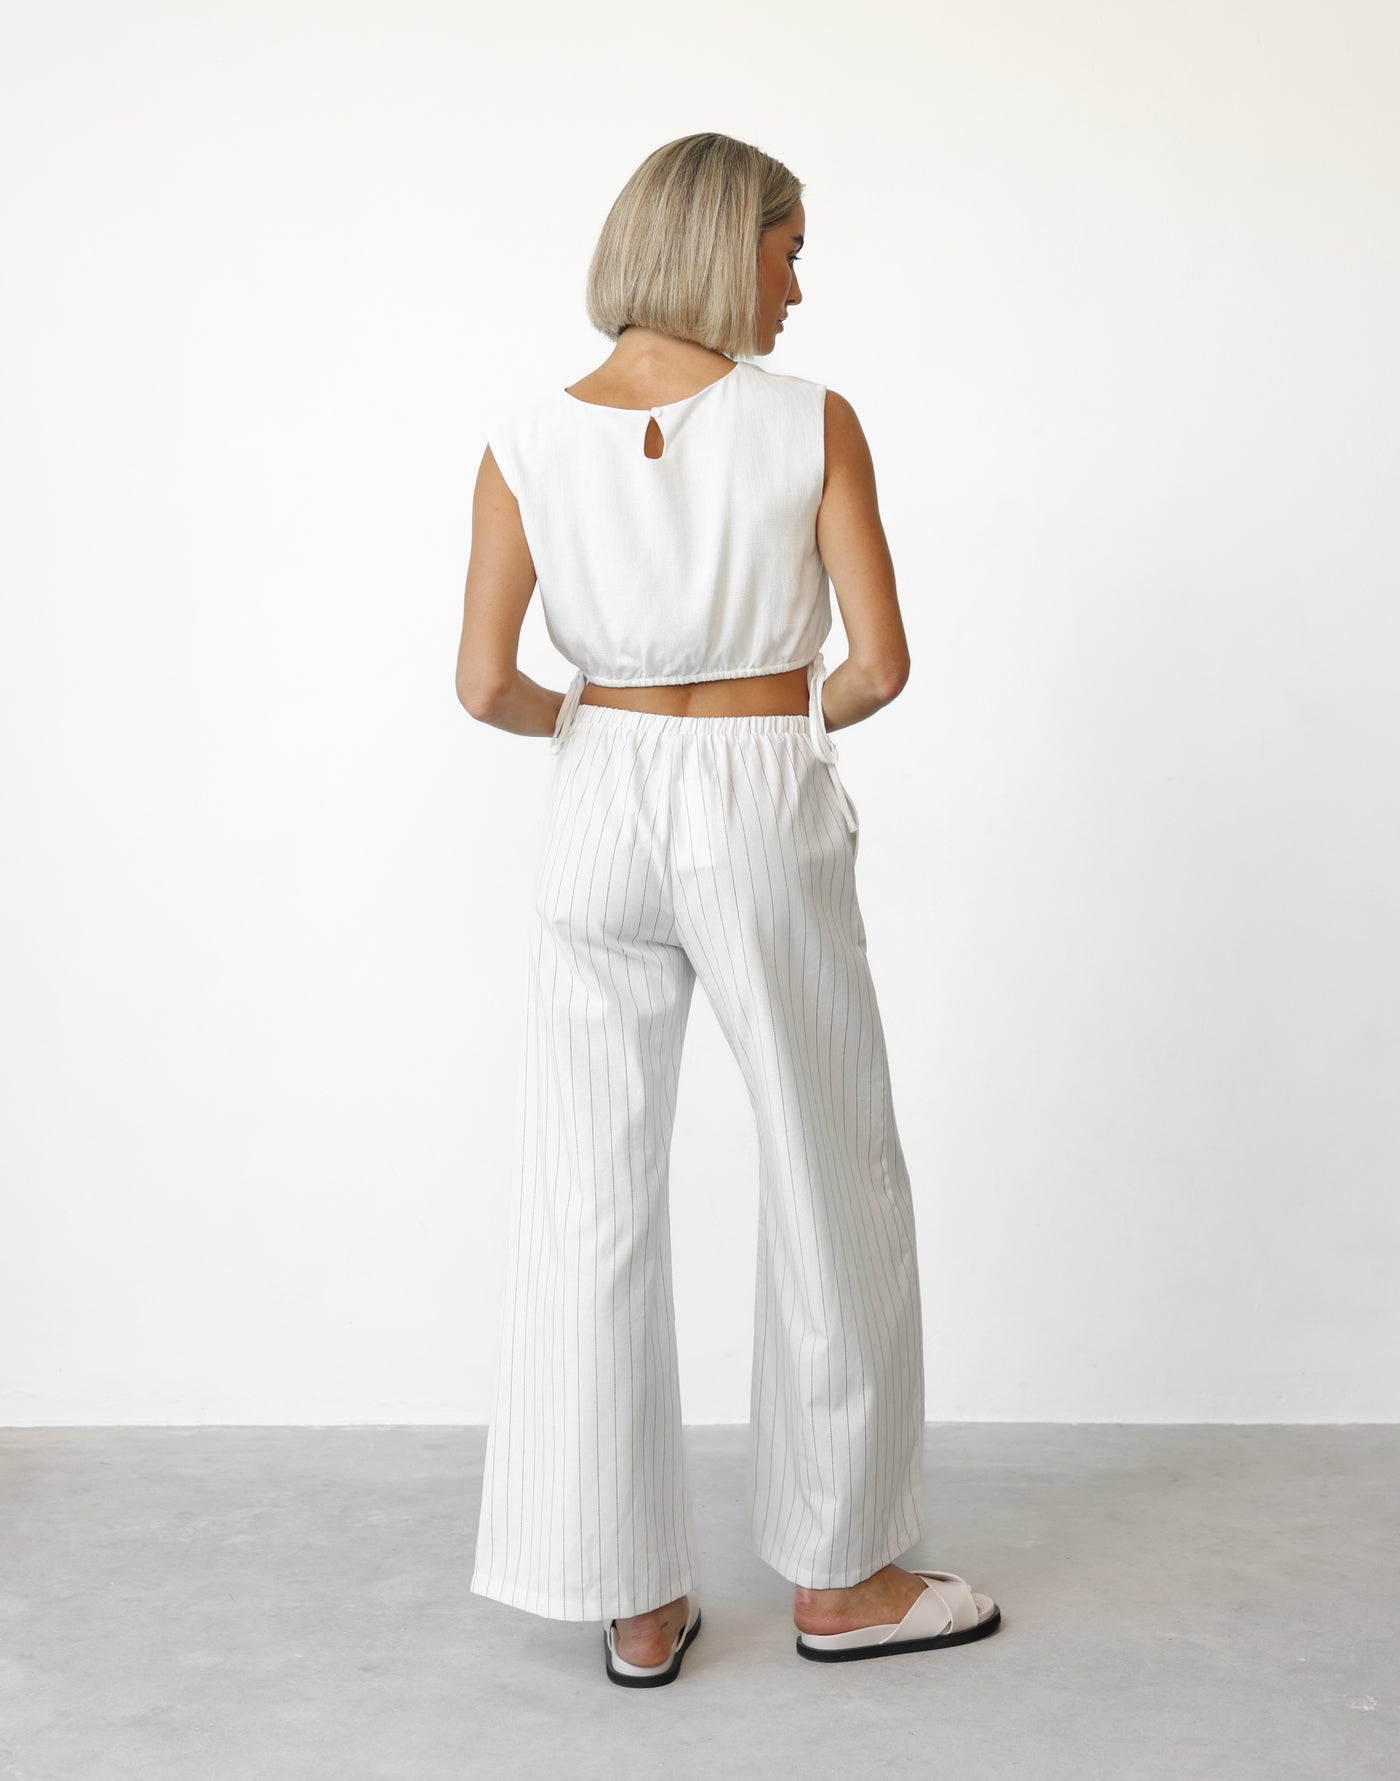 Charlie Pants (White Pinstripe) | CHARCOAL Exclusive - Elasticated Waistband Tie Up Flared Leg Pant - Women's Pants - Charcoal Clothing